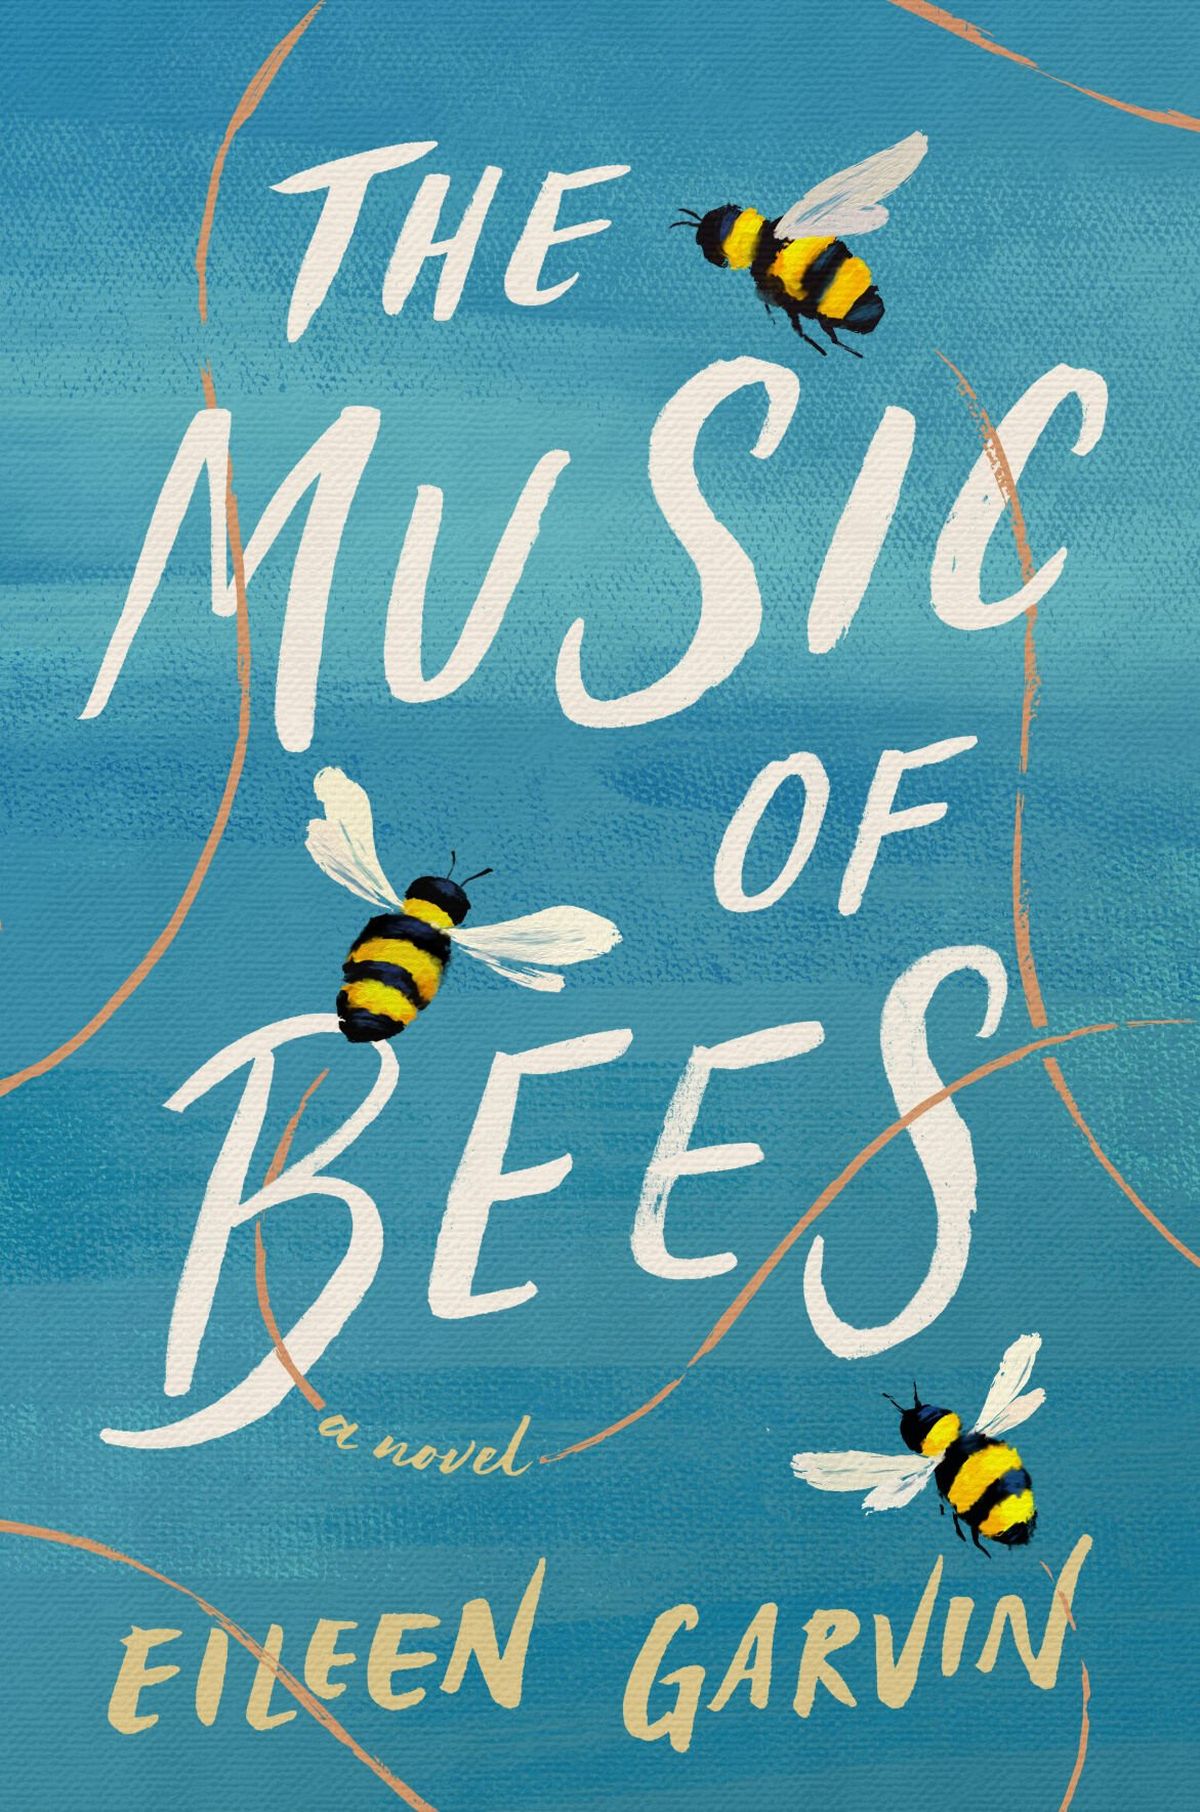 “The Music of Bees” by Eileen Garvin 